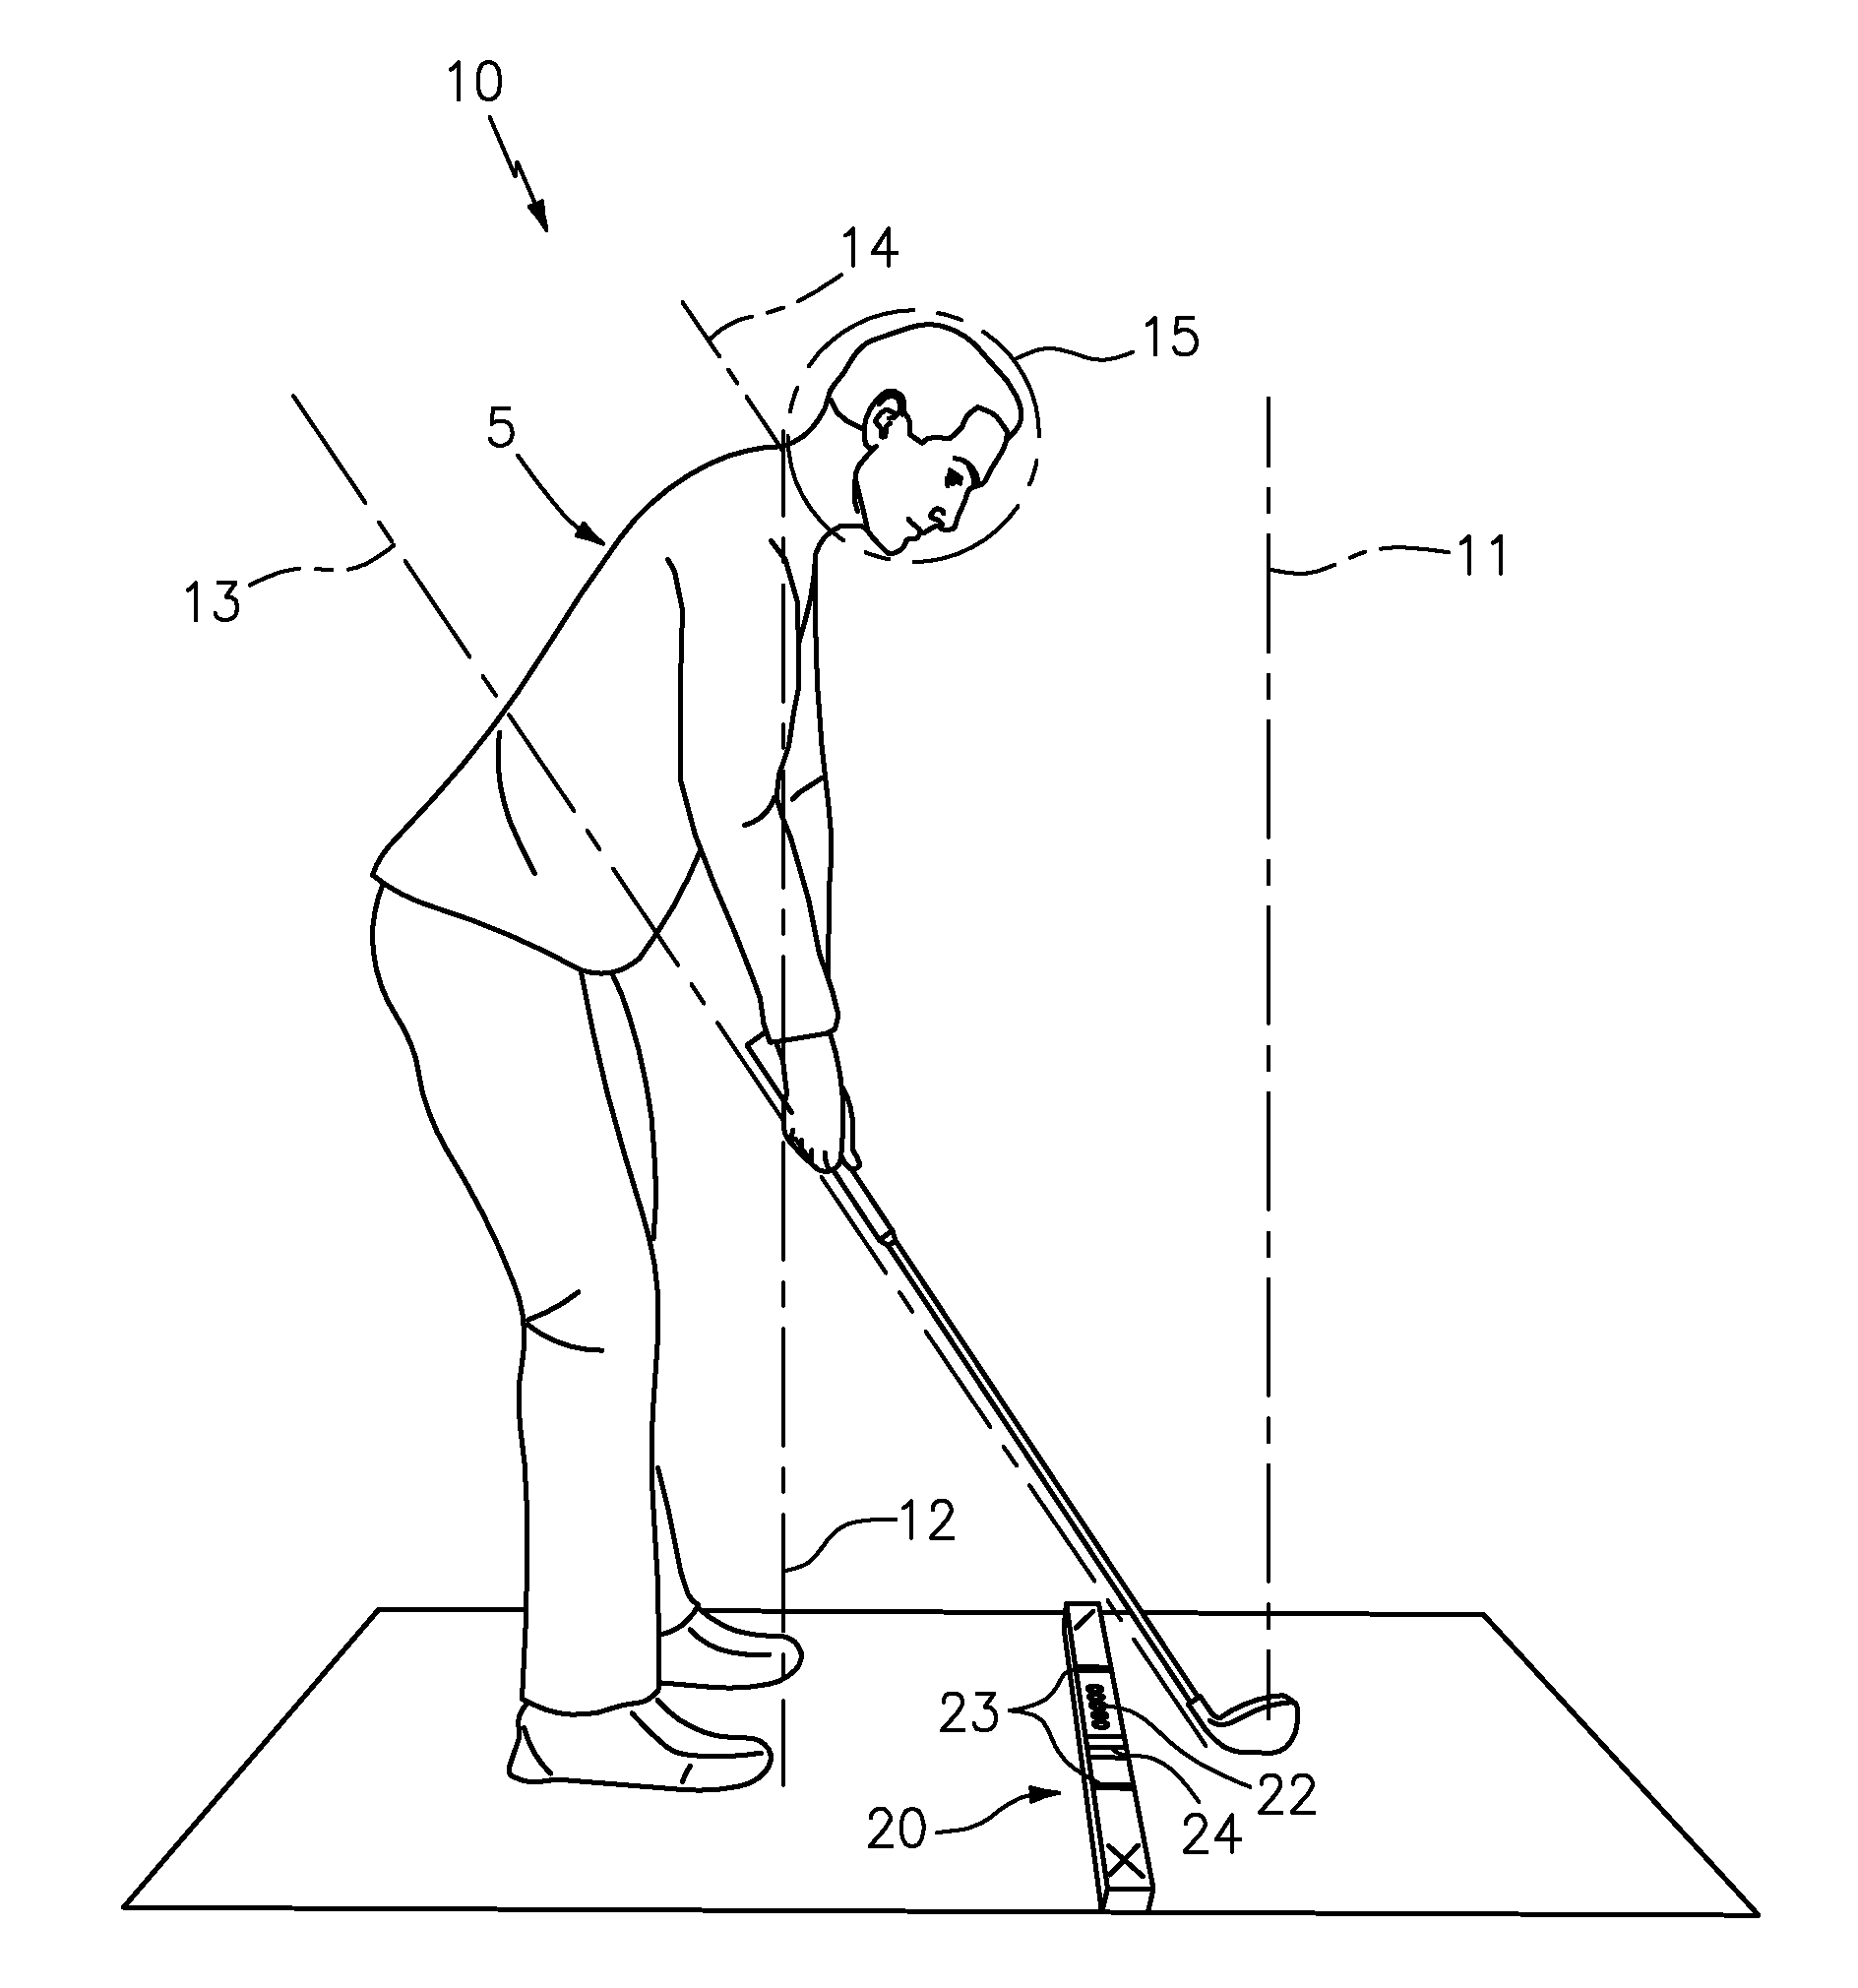 Golf swing instruction tool utilizing a motion training schematic